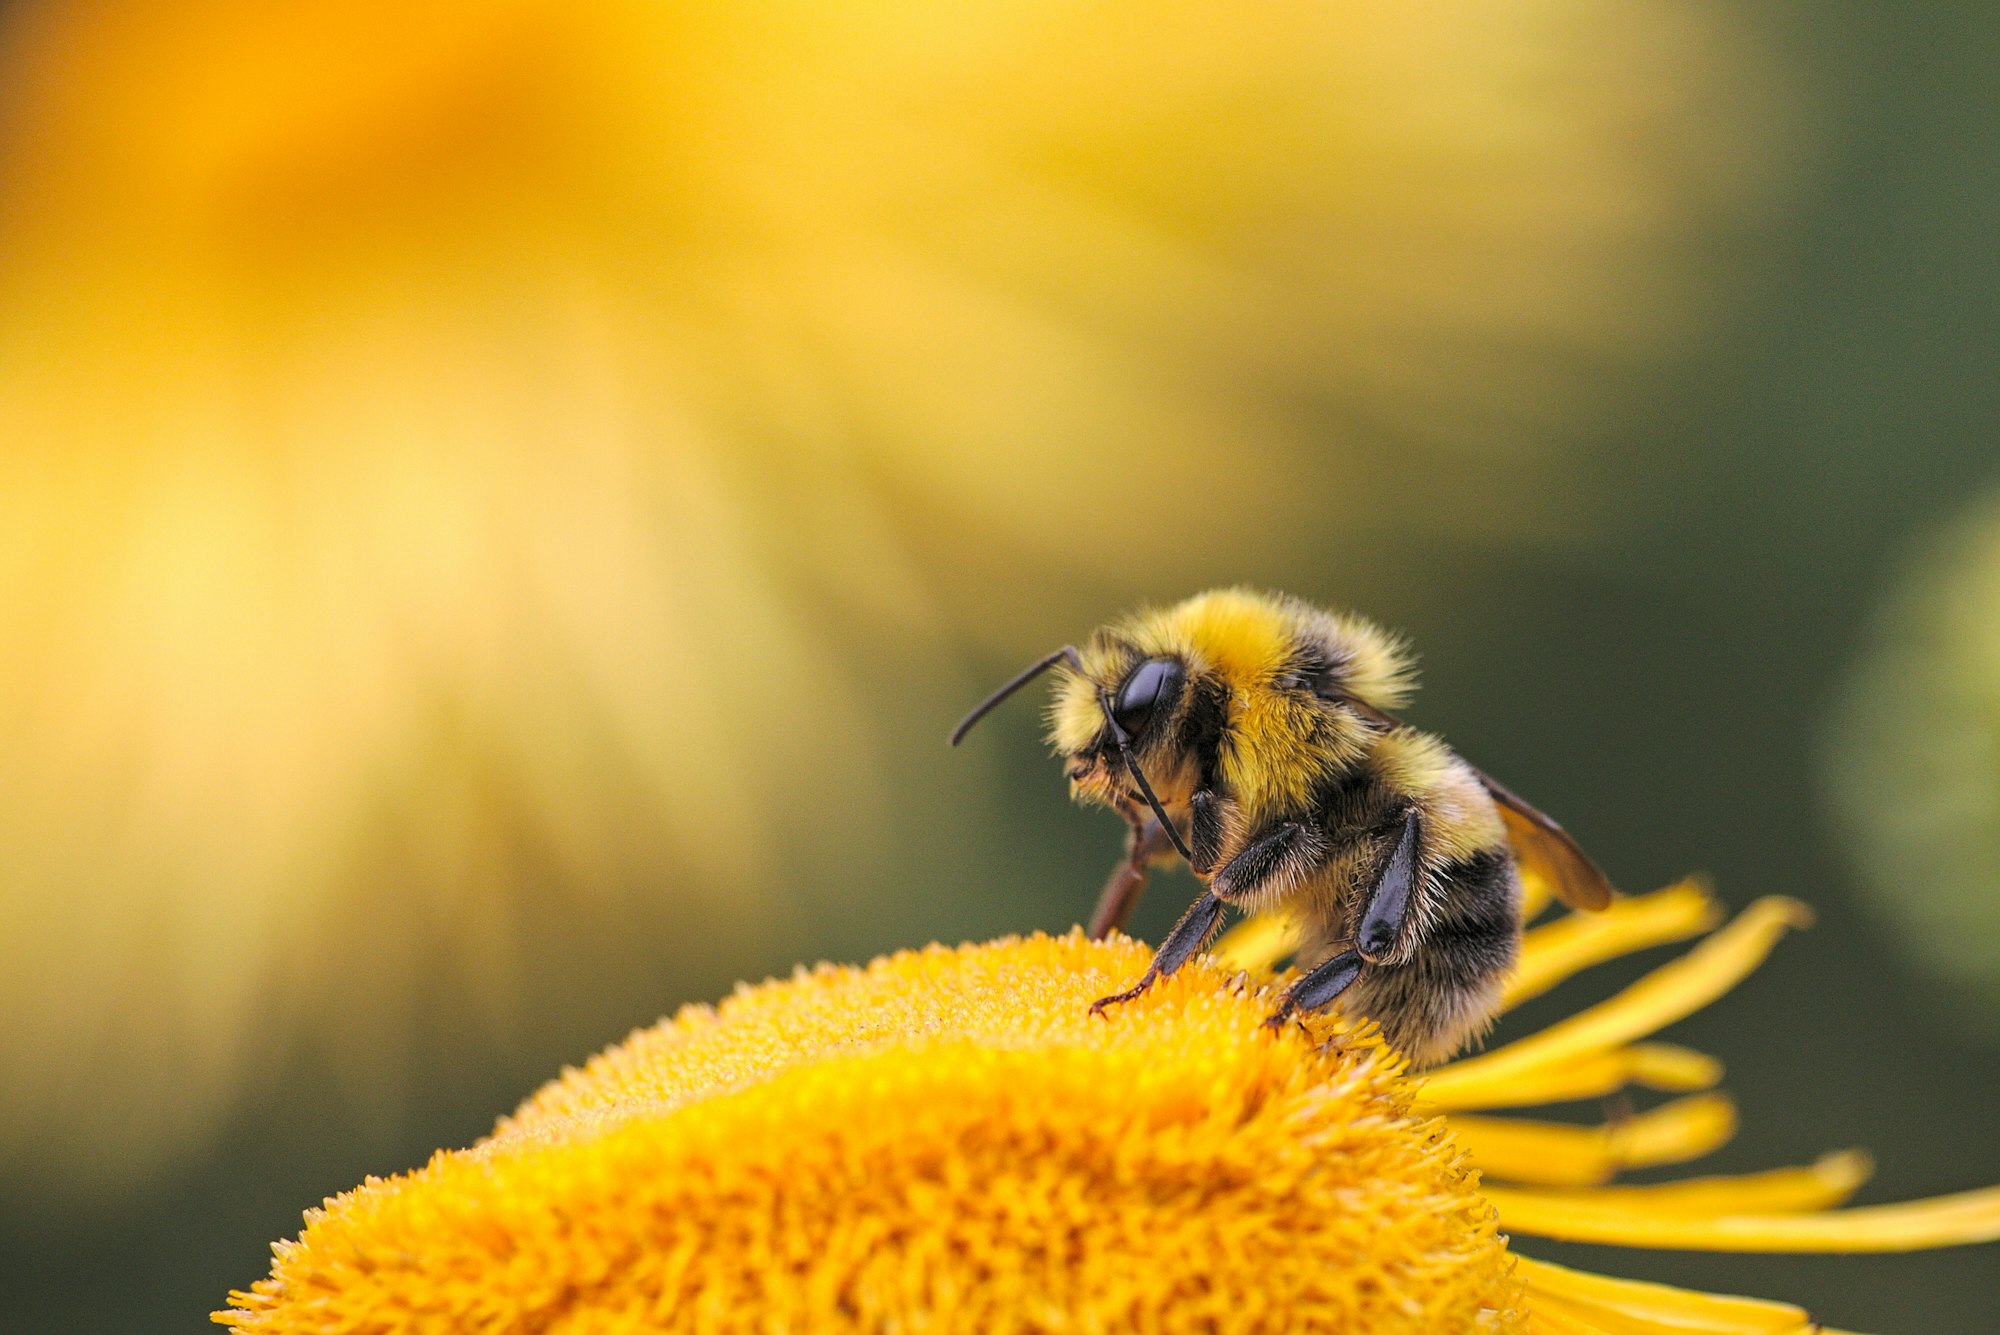 Save the Bees ECI Gets a 'We're Way Ahead of You' from EU Commission